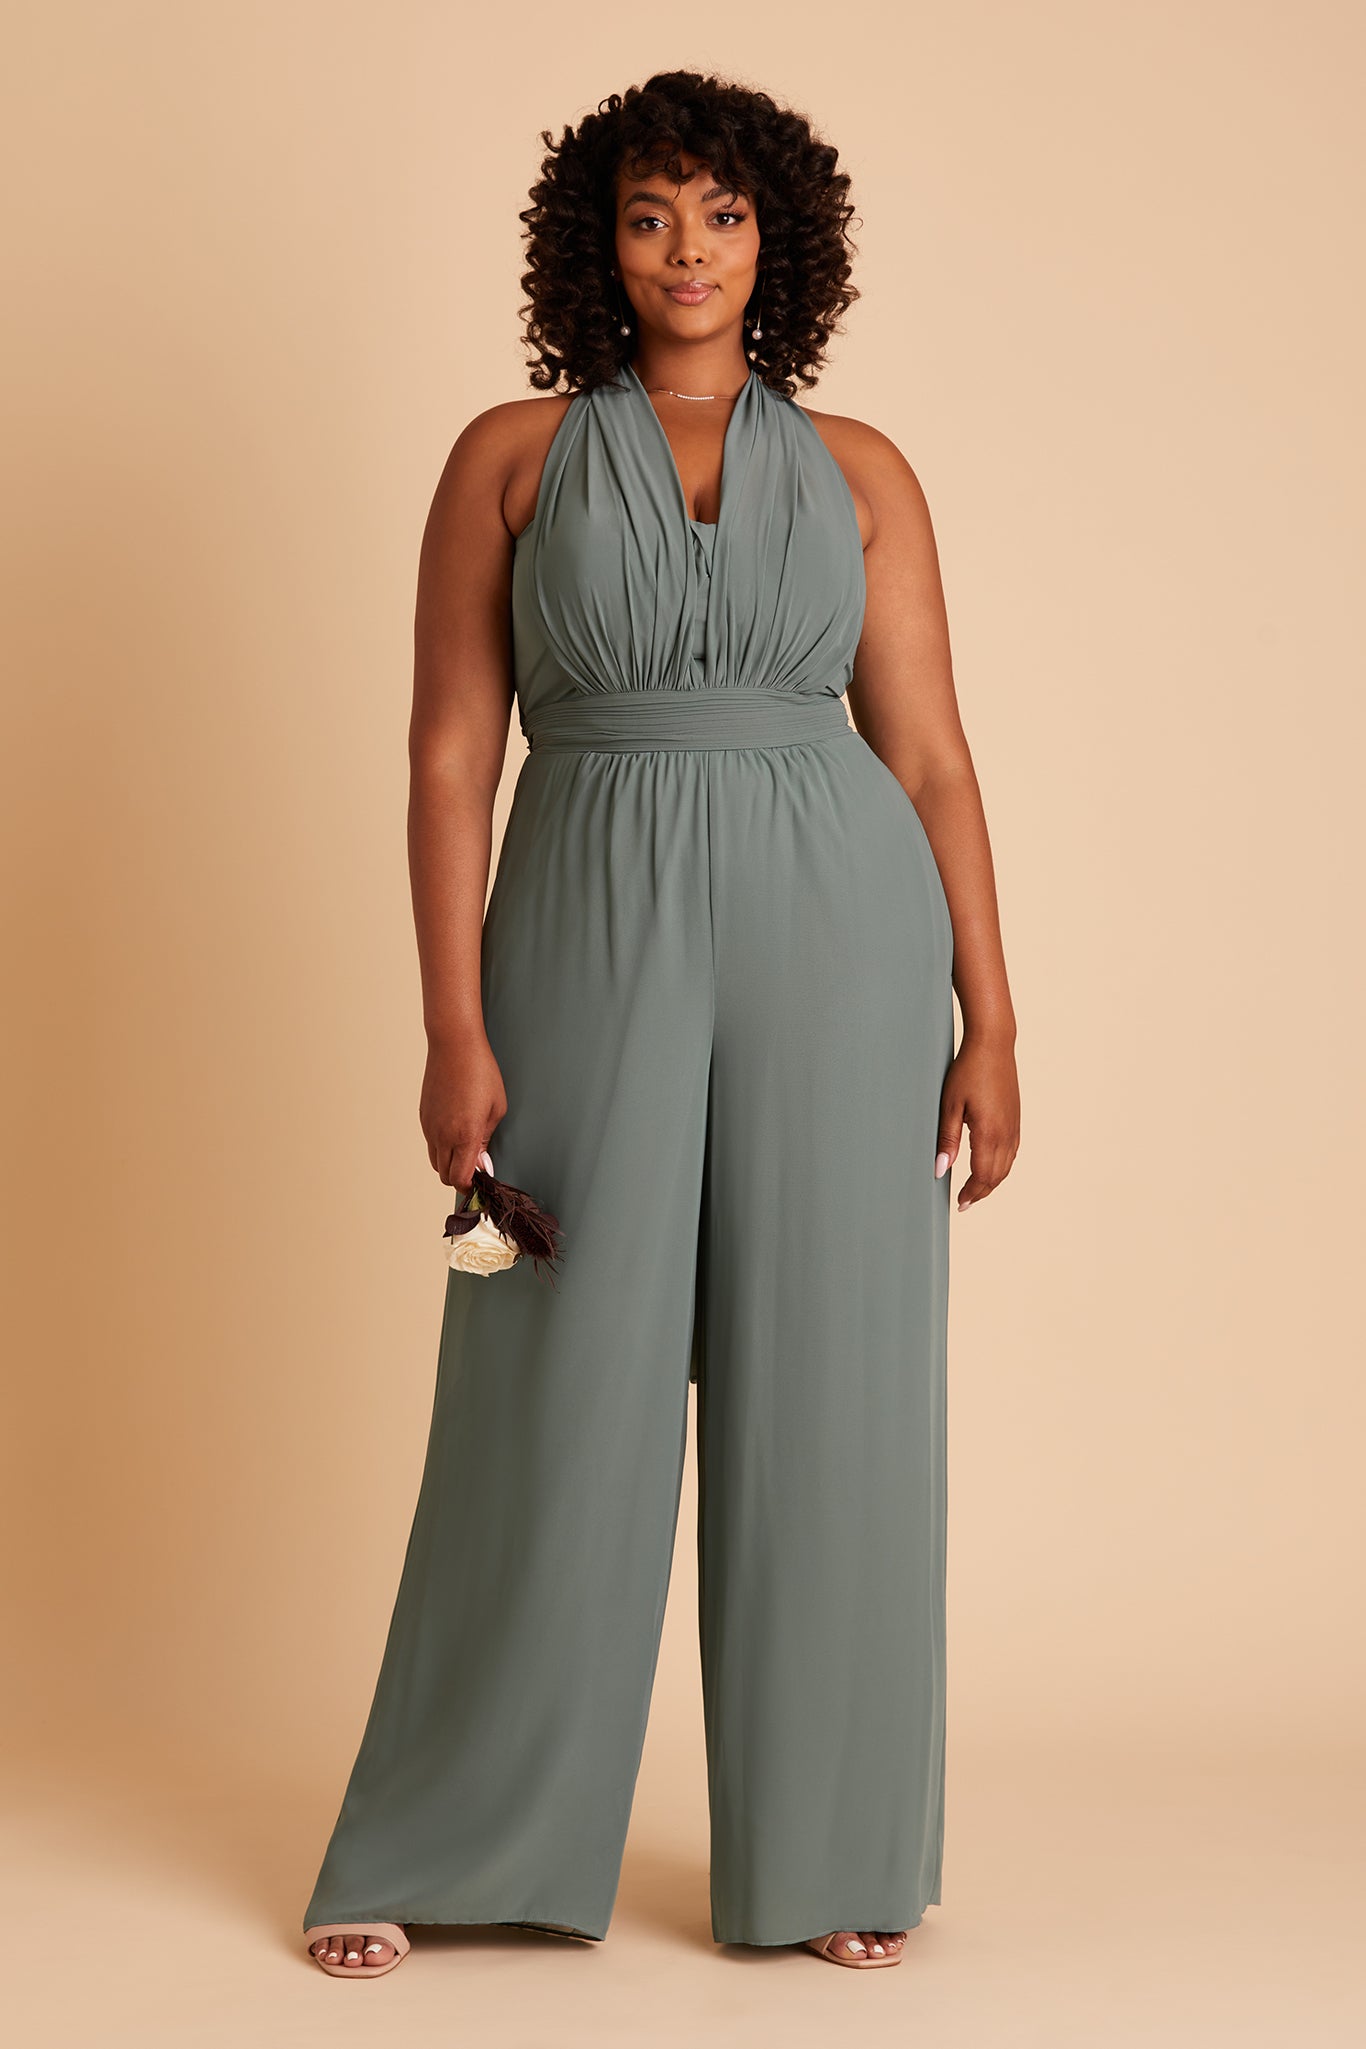 Gigi plus size convertible jumpsuit in sea glass chiffon by Birdy Grey, front view